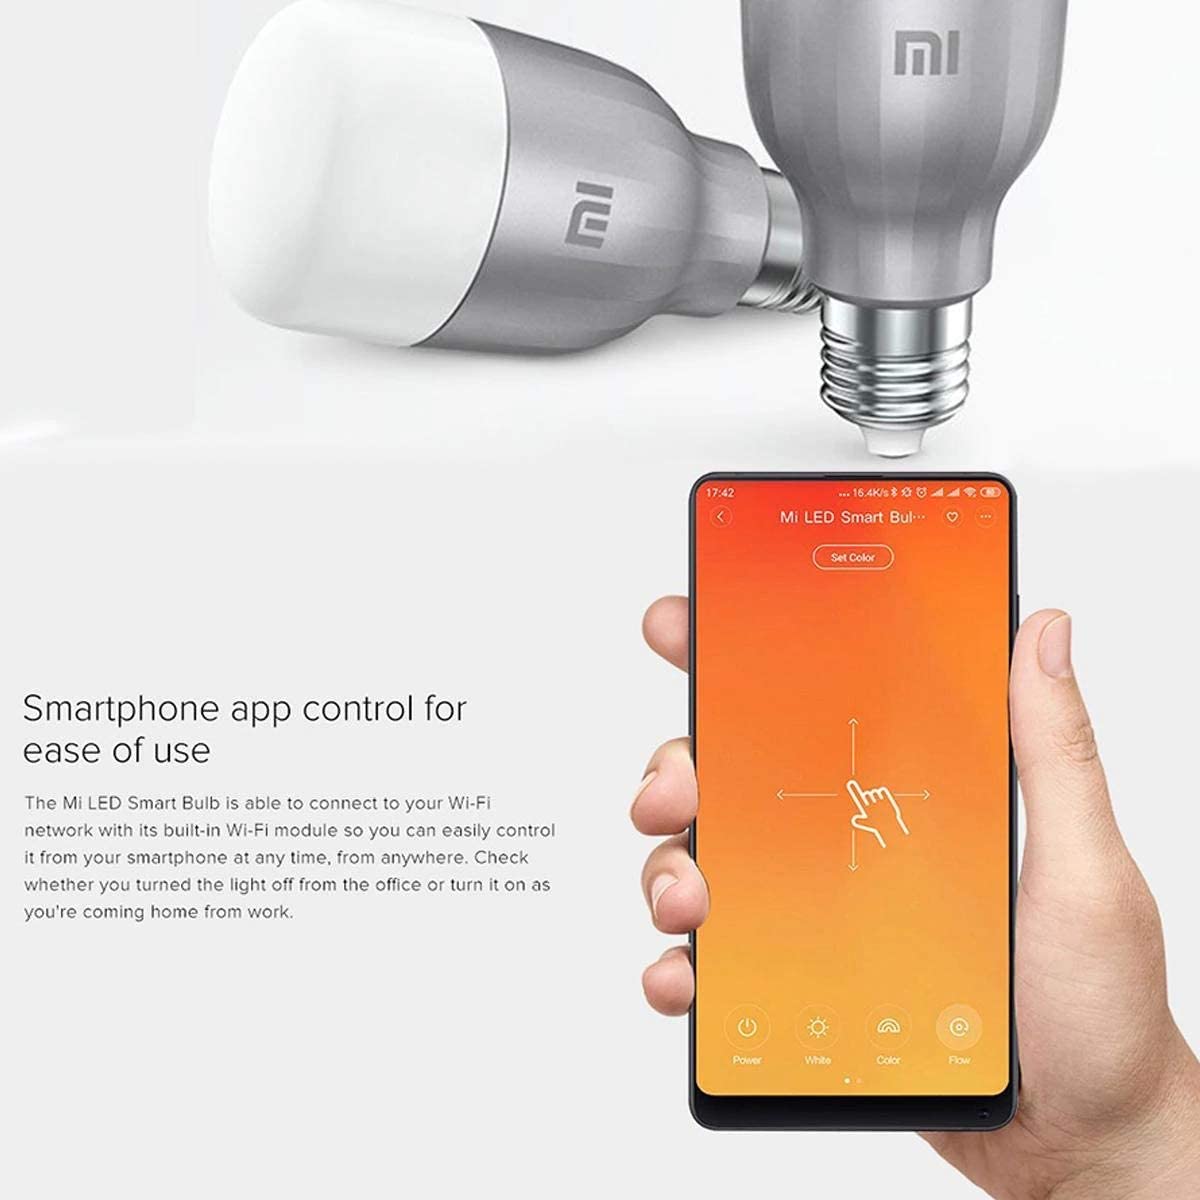 Xiaomi Xiaomi Mi Smart Led Bulb Essential(White And Color) Wifi Remote Control Smart Light Work With Alexa And Google Assistant, Voice Control, Wifi Connection, Adjustable Color Temperature, Scheduled On/Off, Smart App Control Xiaomi Mi Led Xiaomi Mi Led Smart Bulb Essential Bulb (White And Color)(10W)